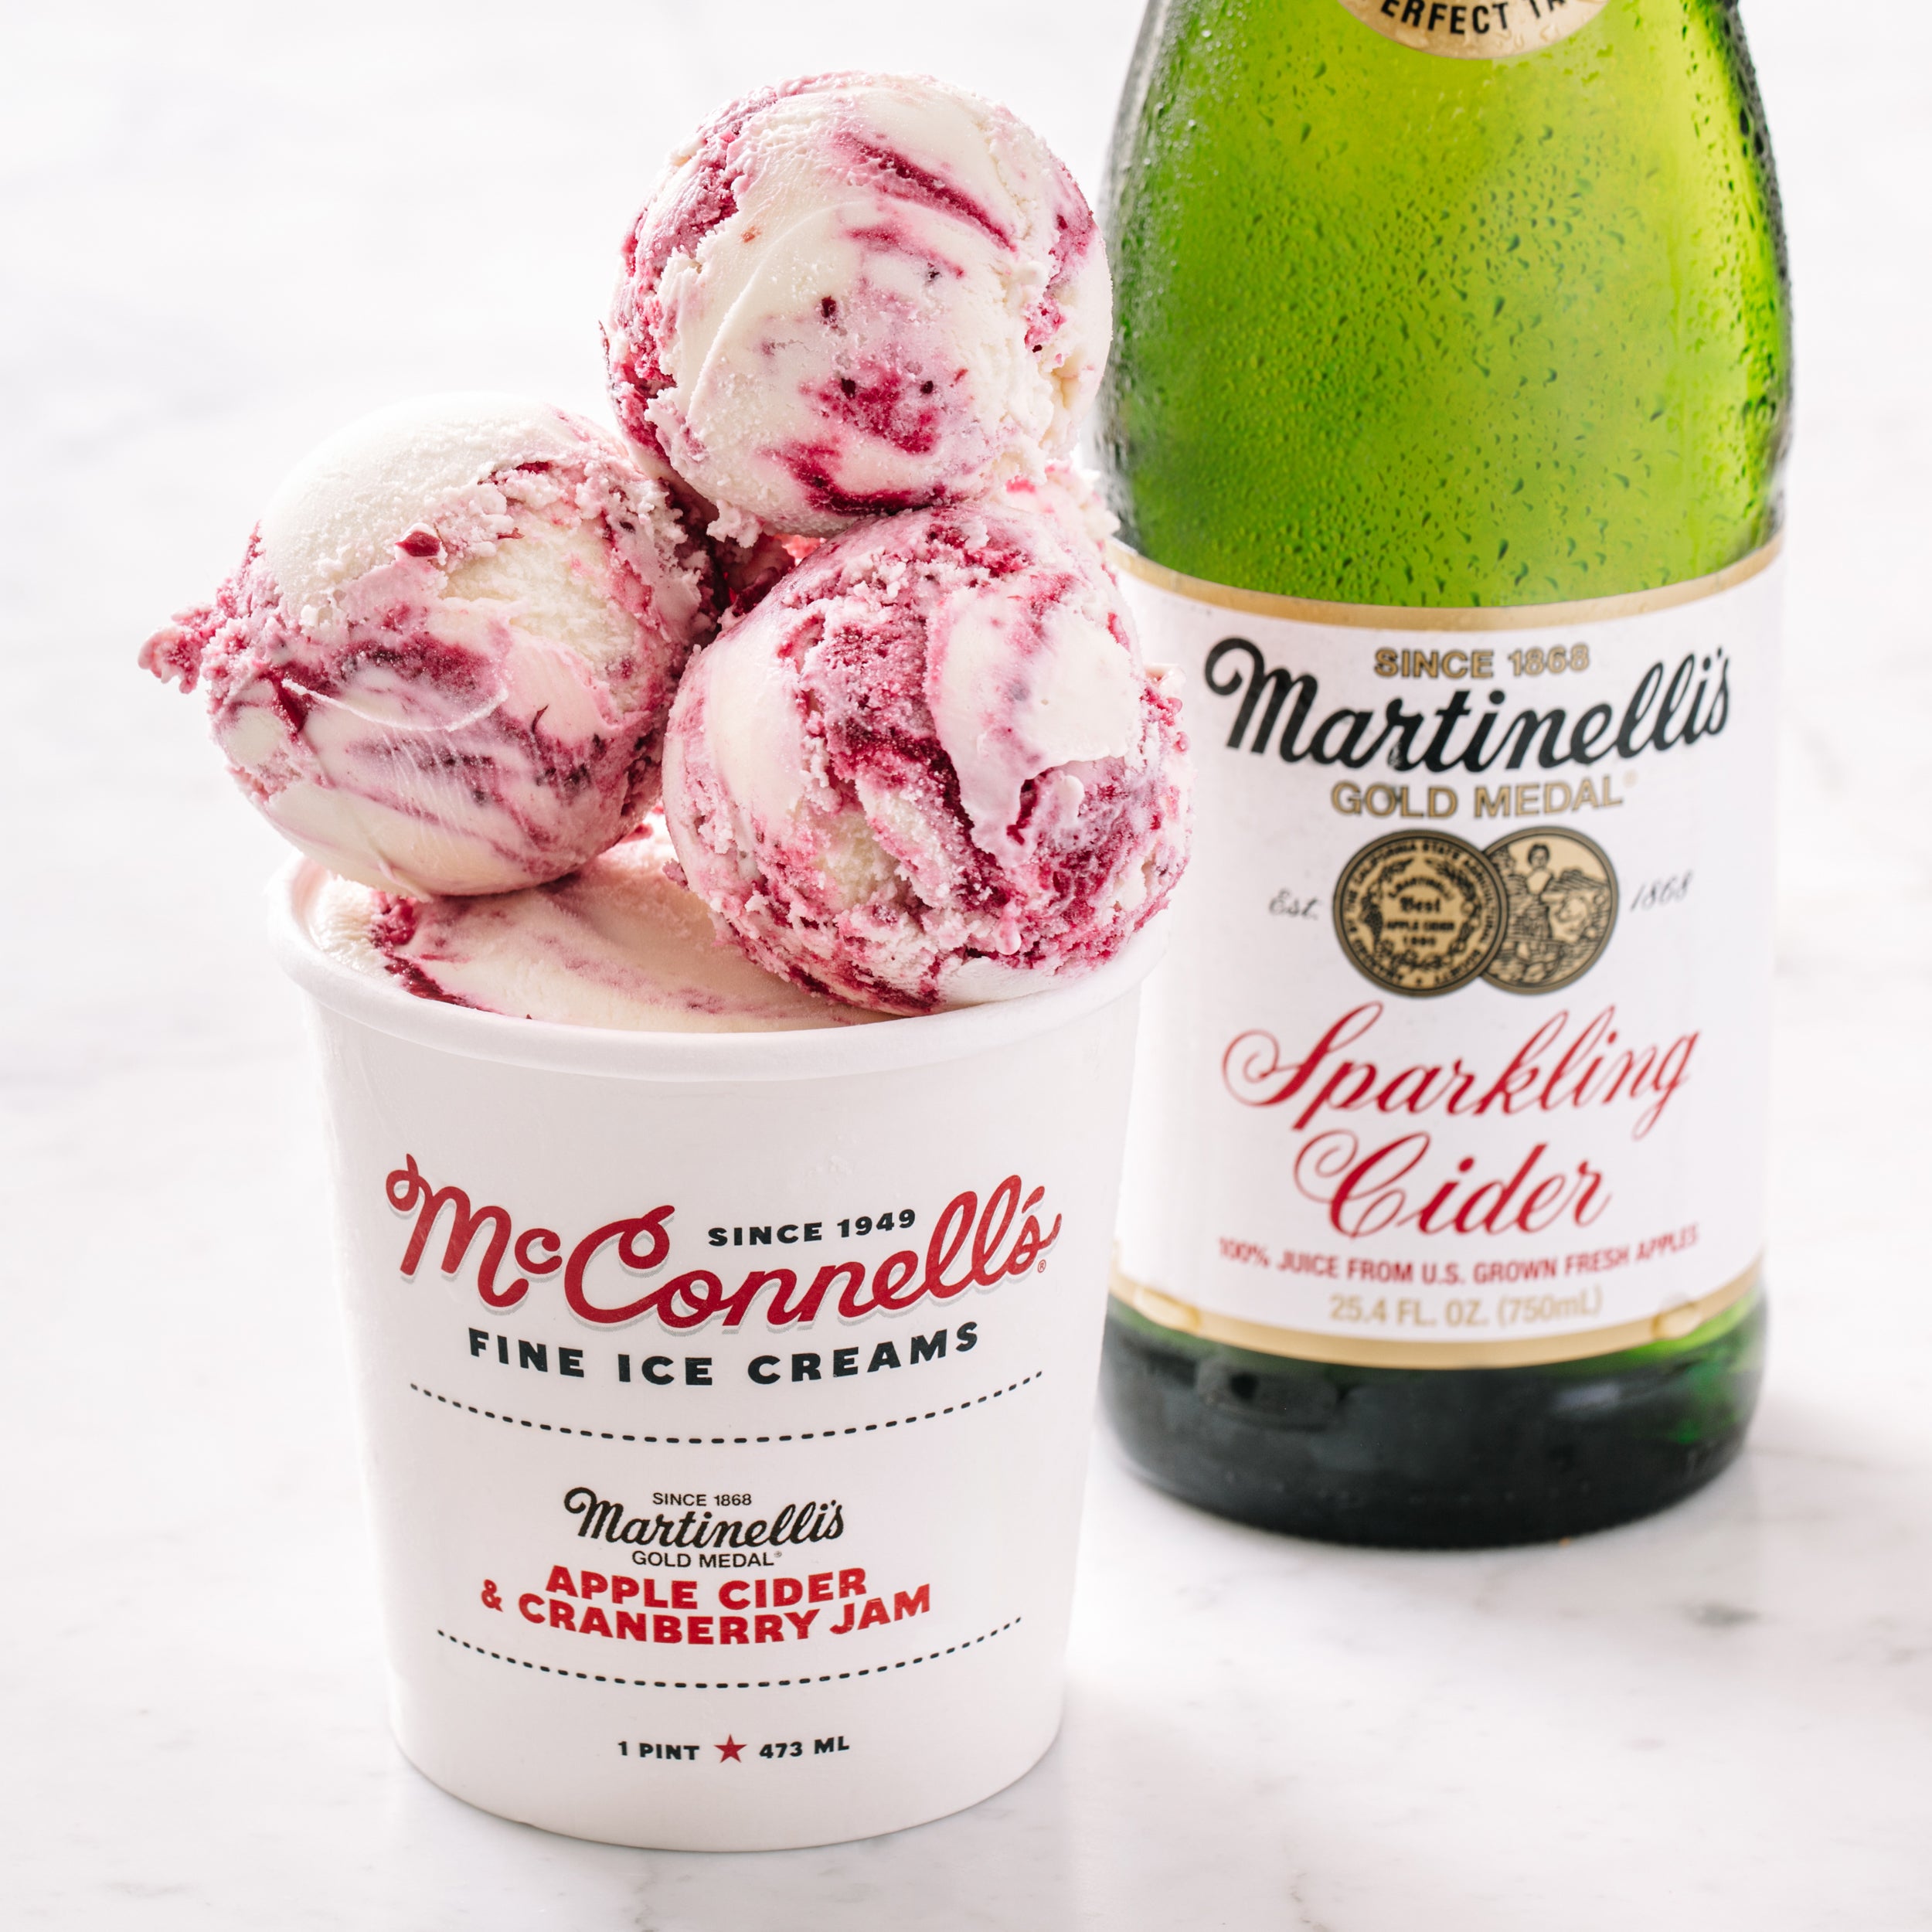 McConnell's & Martinelli's: Behind the Partnership